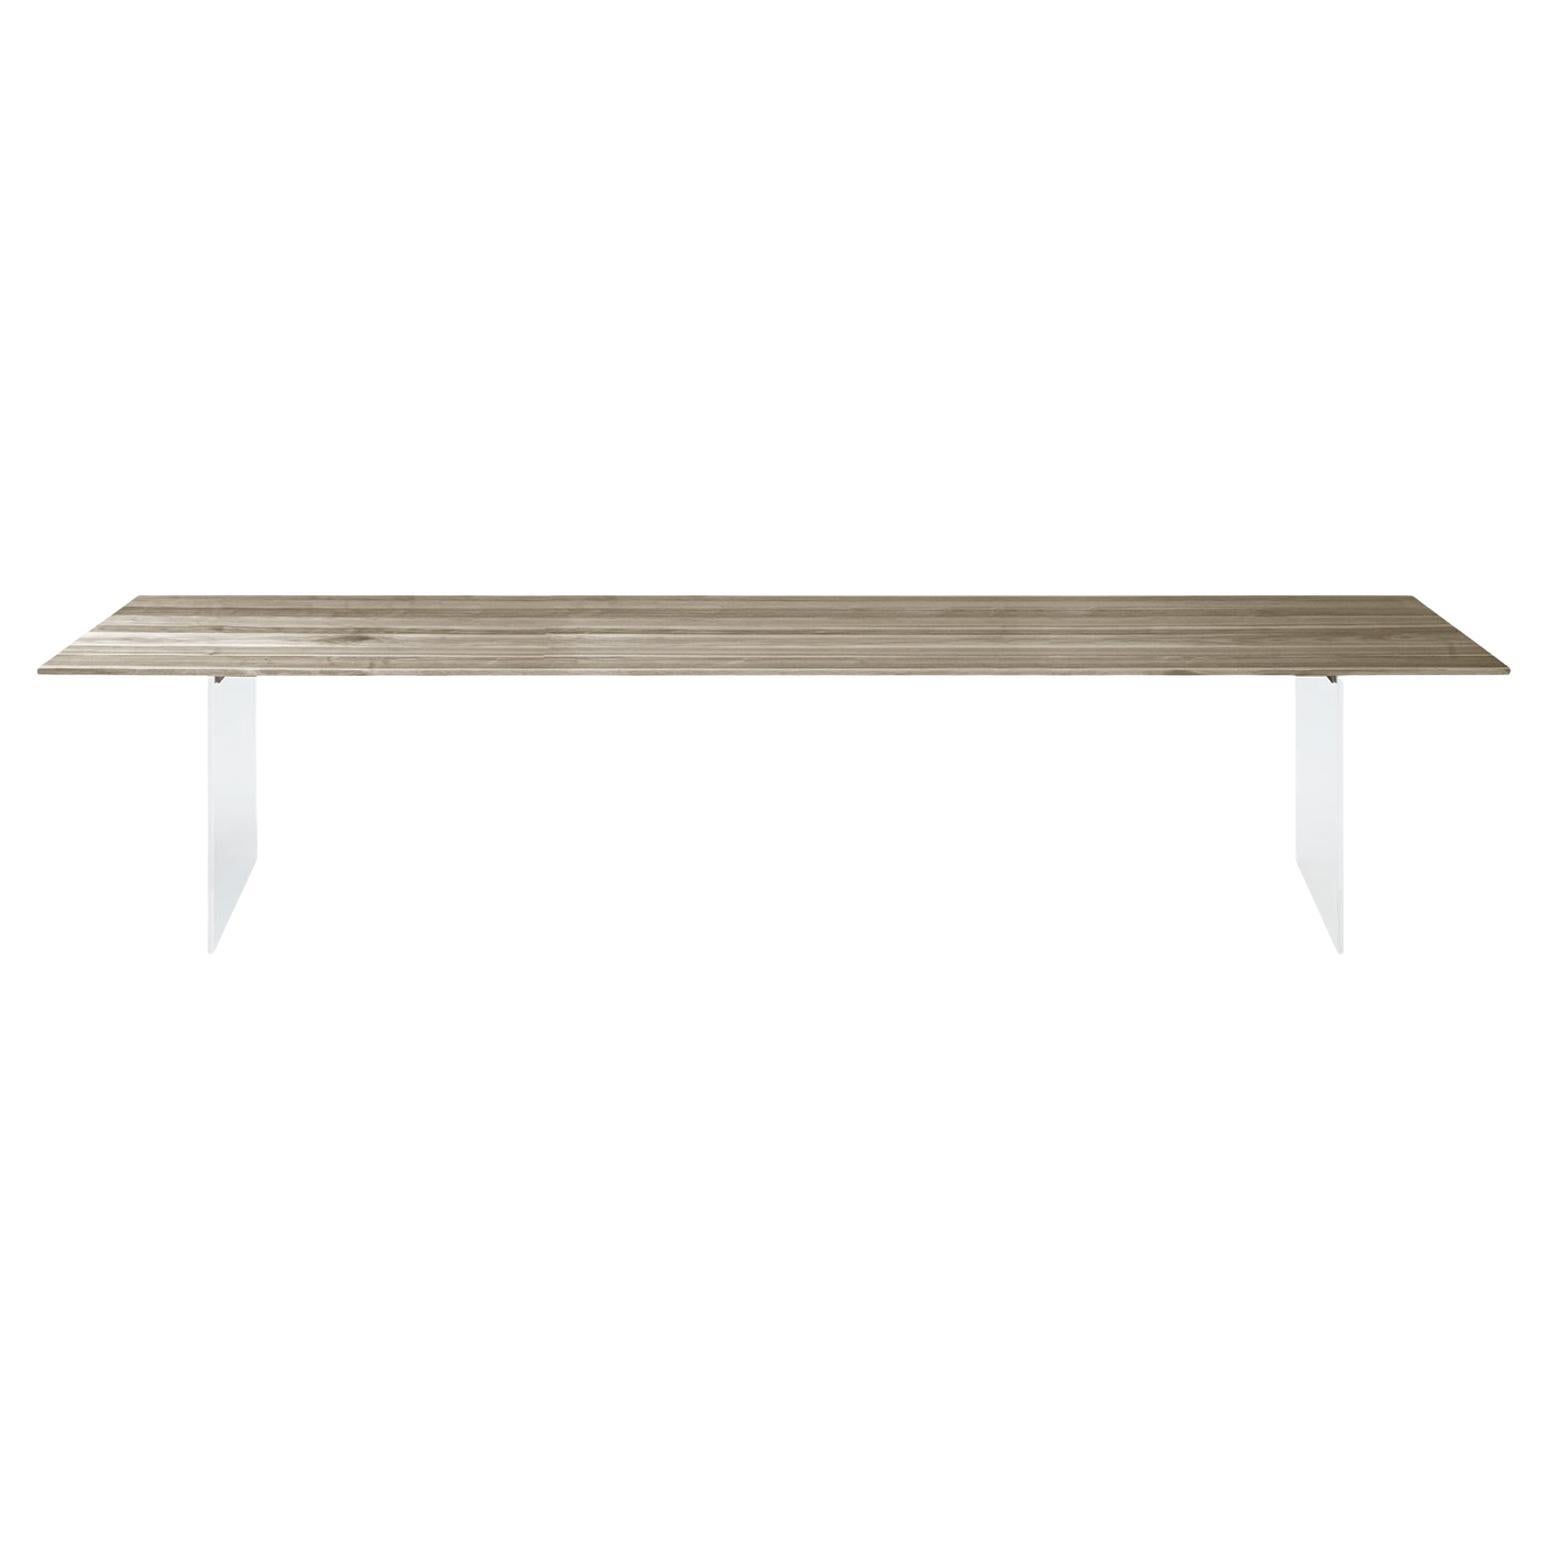 Sospeso Solid Wood Table, Walnut in Hand-Made Natural Grey Finish, Contemporary For Sale